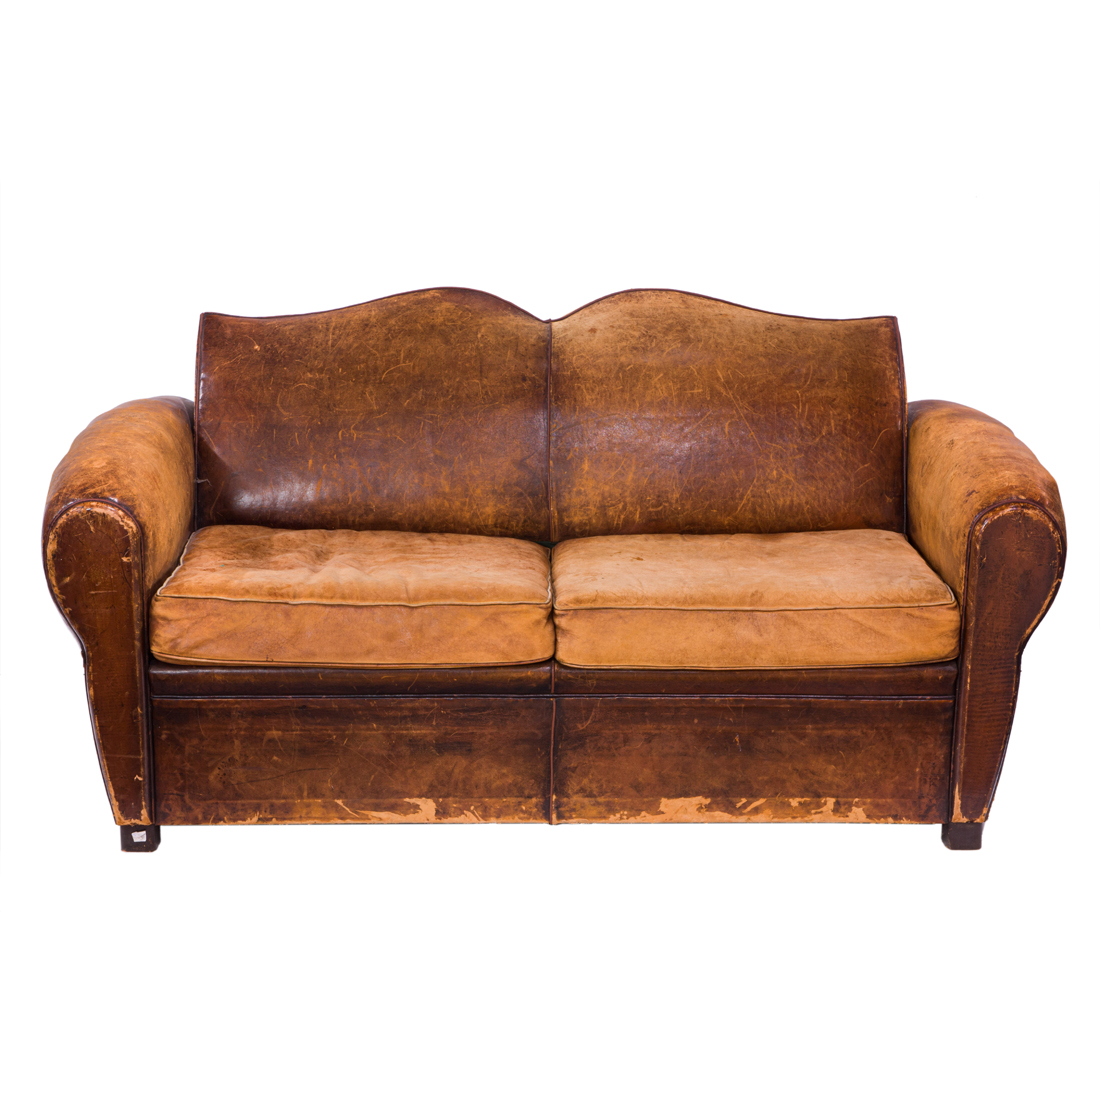 AN ART DECO LEATHER TWO SEAT SOFA 2d0f4a